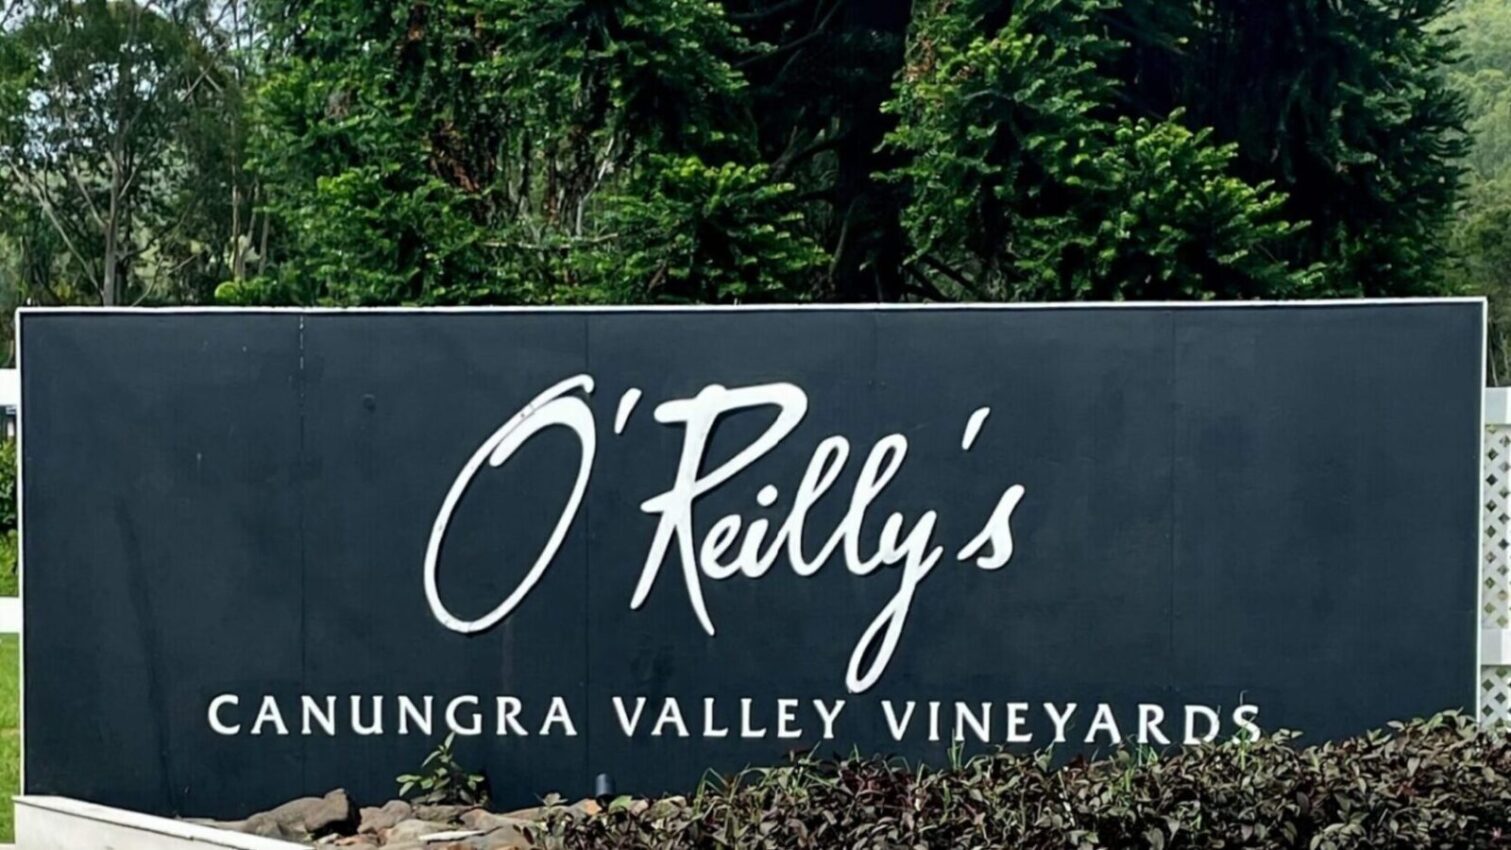 O'Reillys Canungra Valley Vineyard entrance sign with a background of trees and shrubs in the foreground.